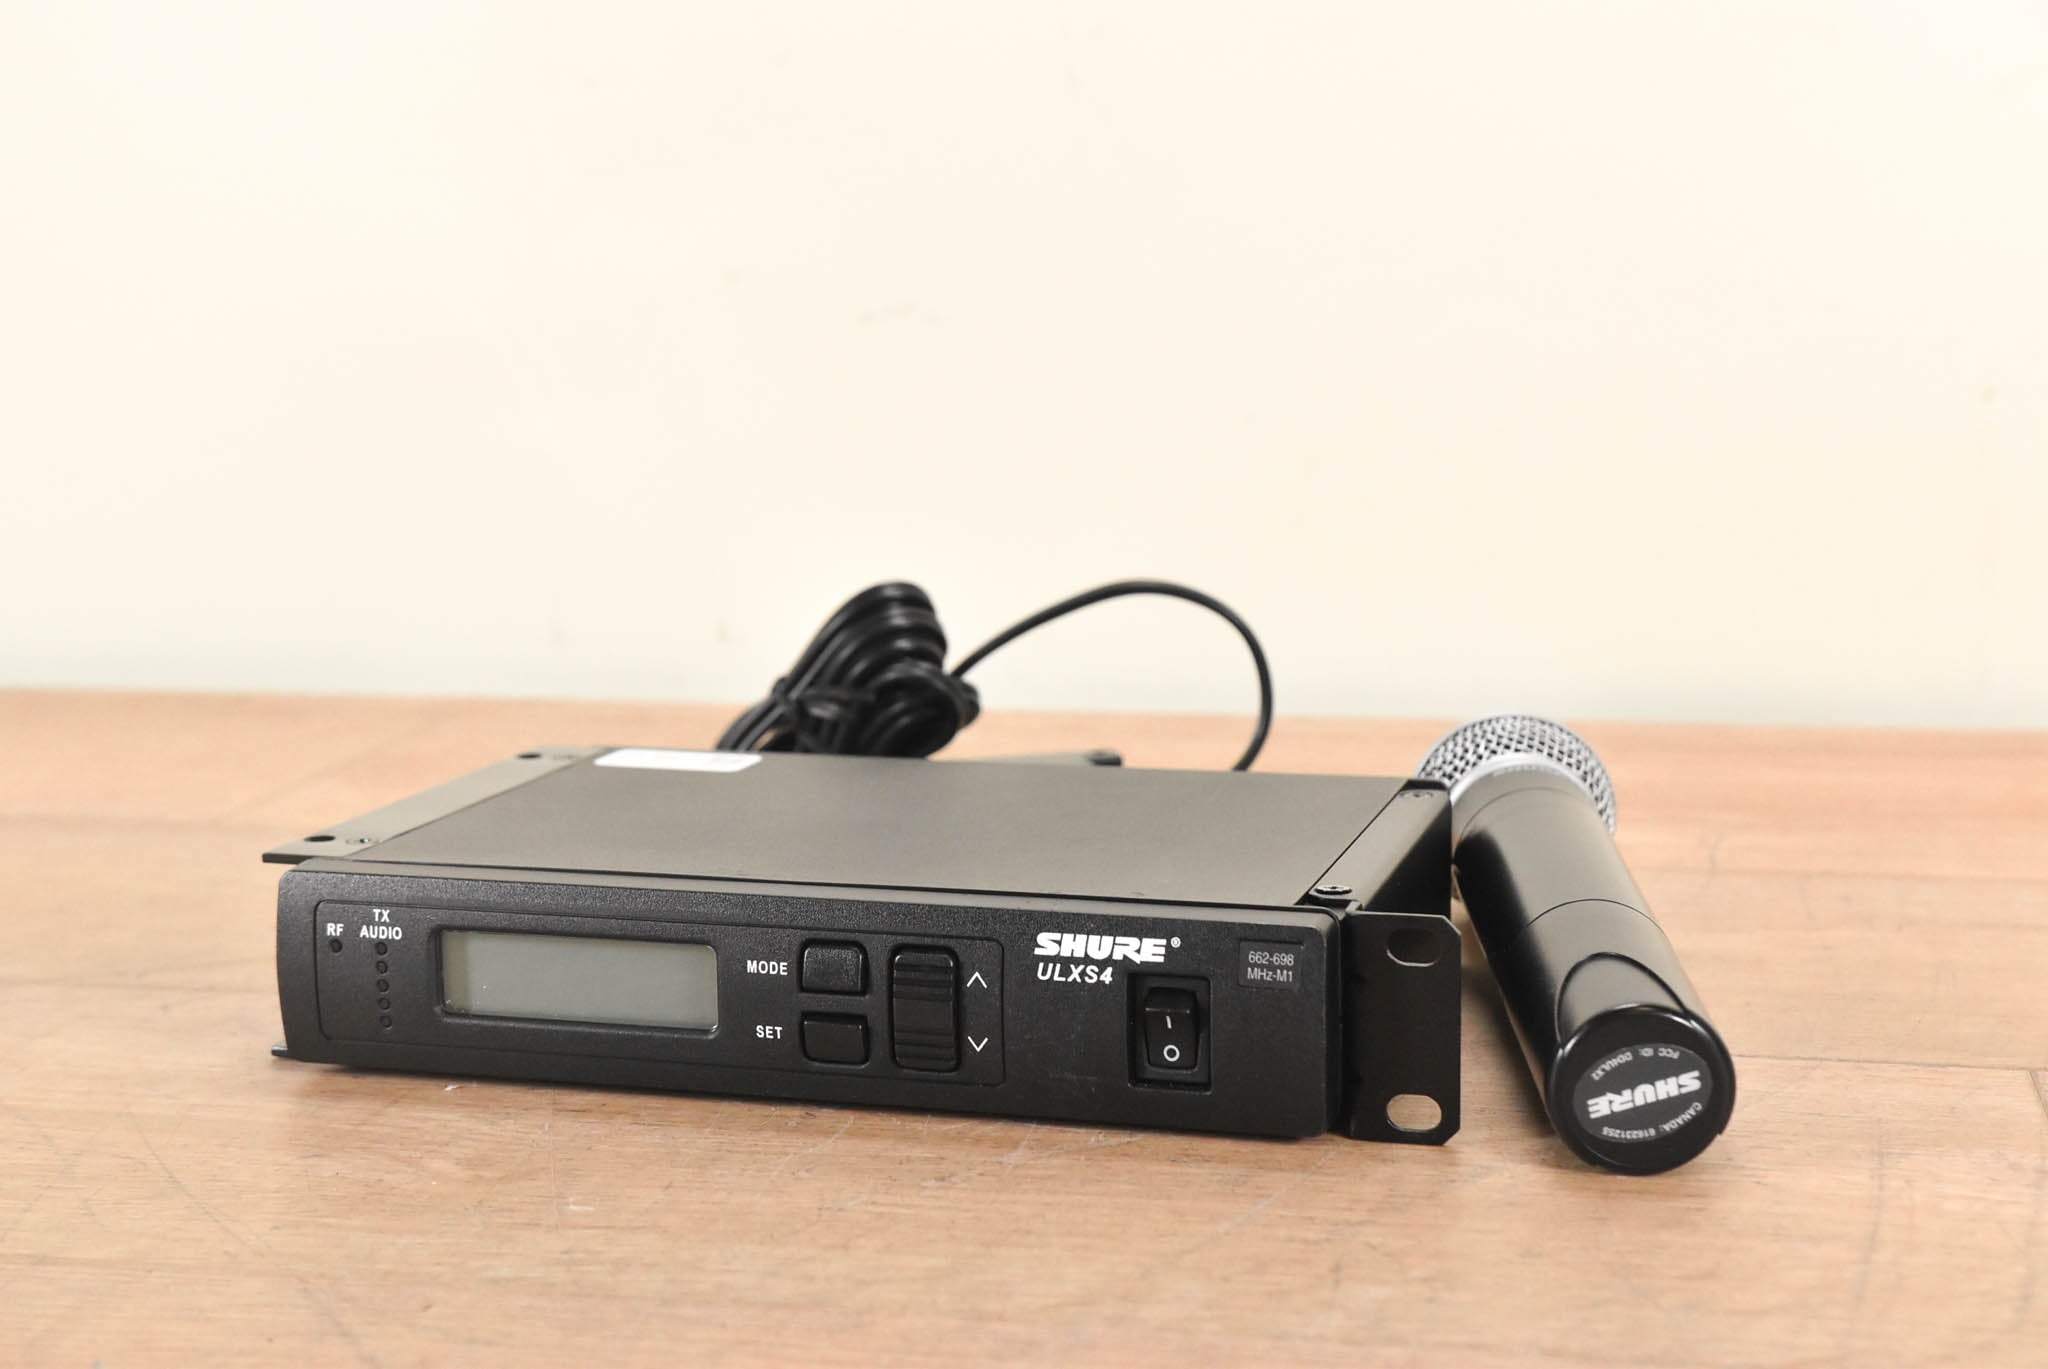 Shure ULXS24/58 Handheld Wireless System - M1 Band: 662-698 MHz